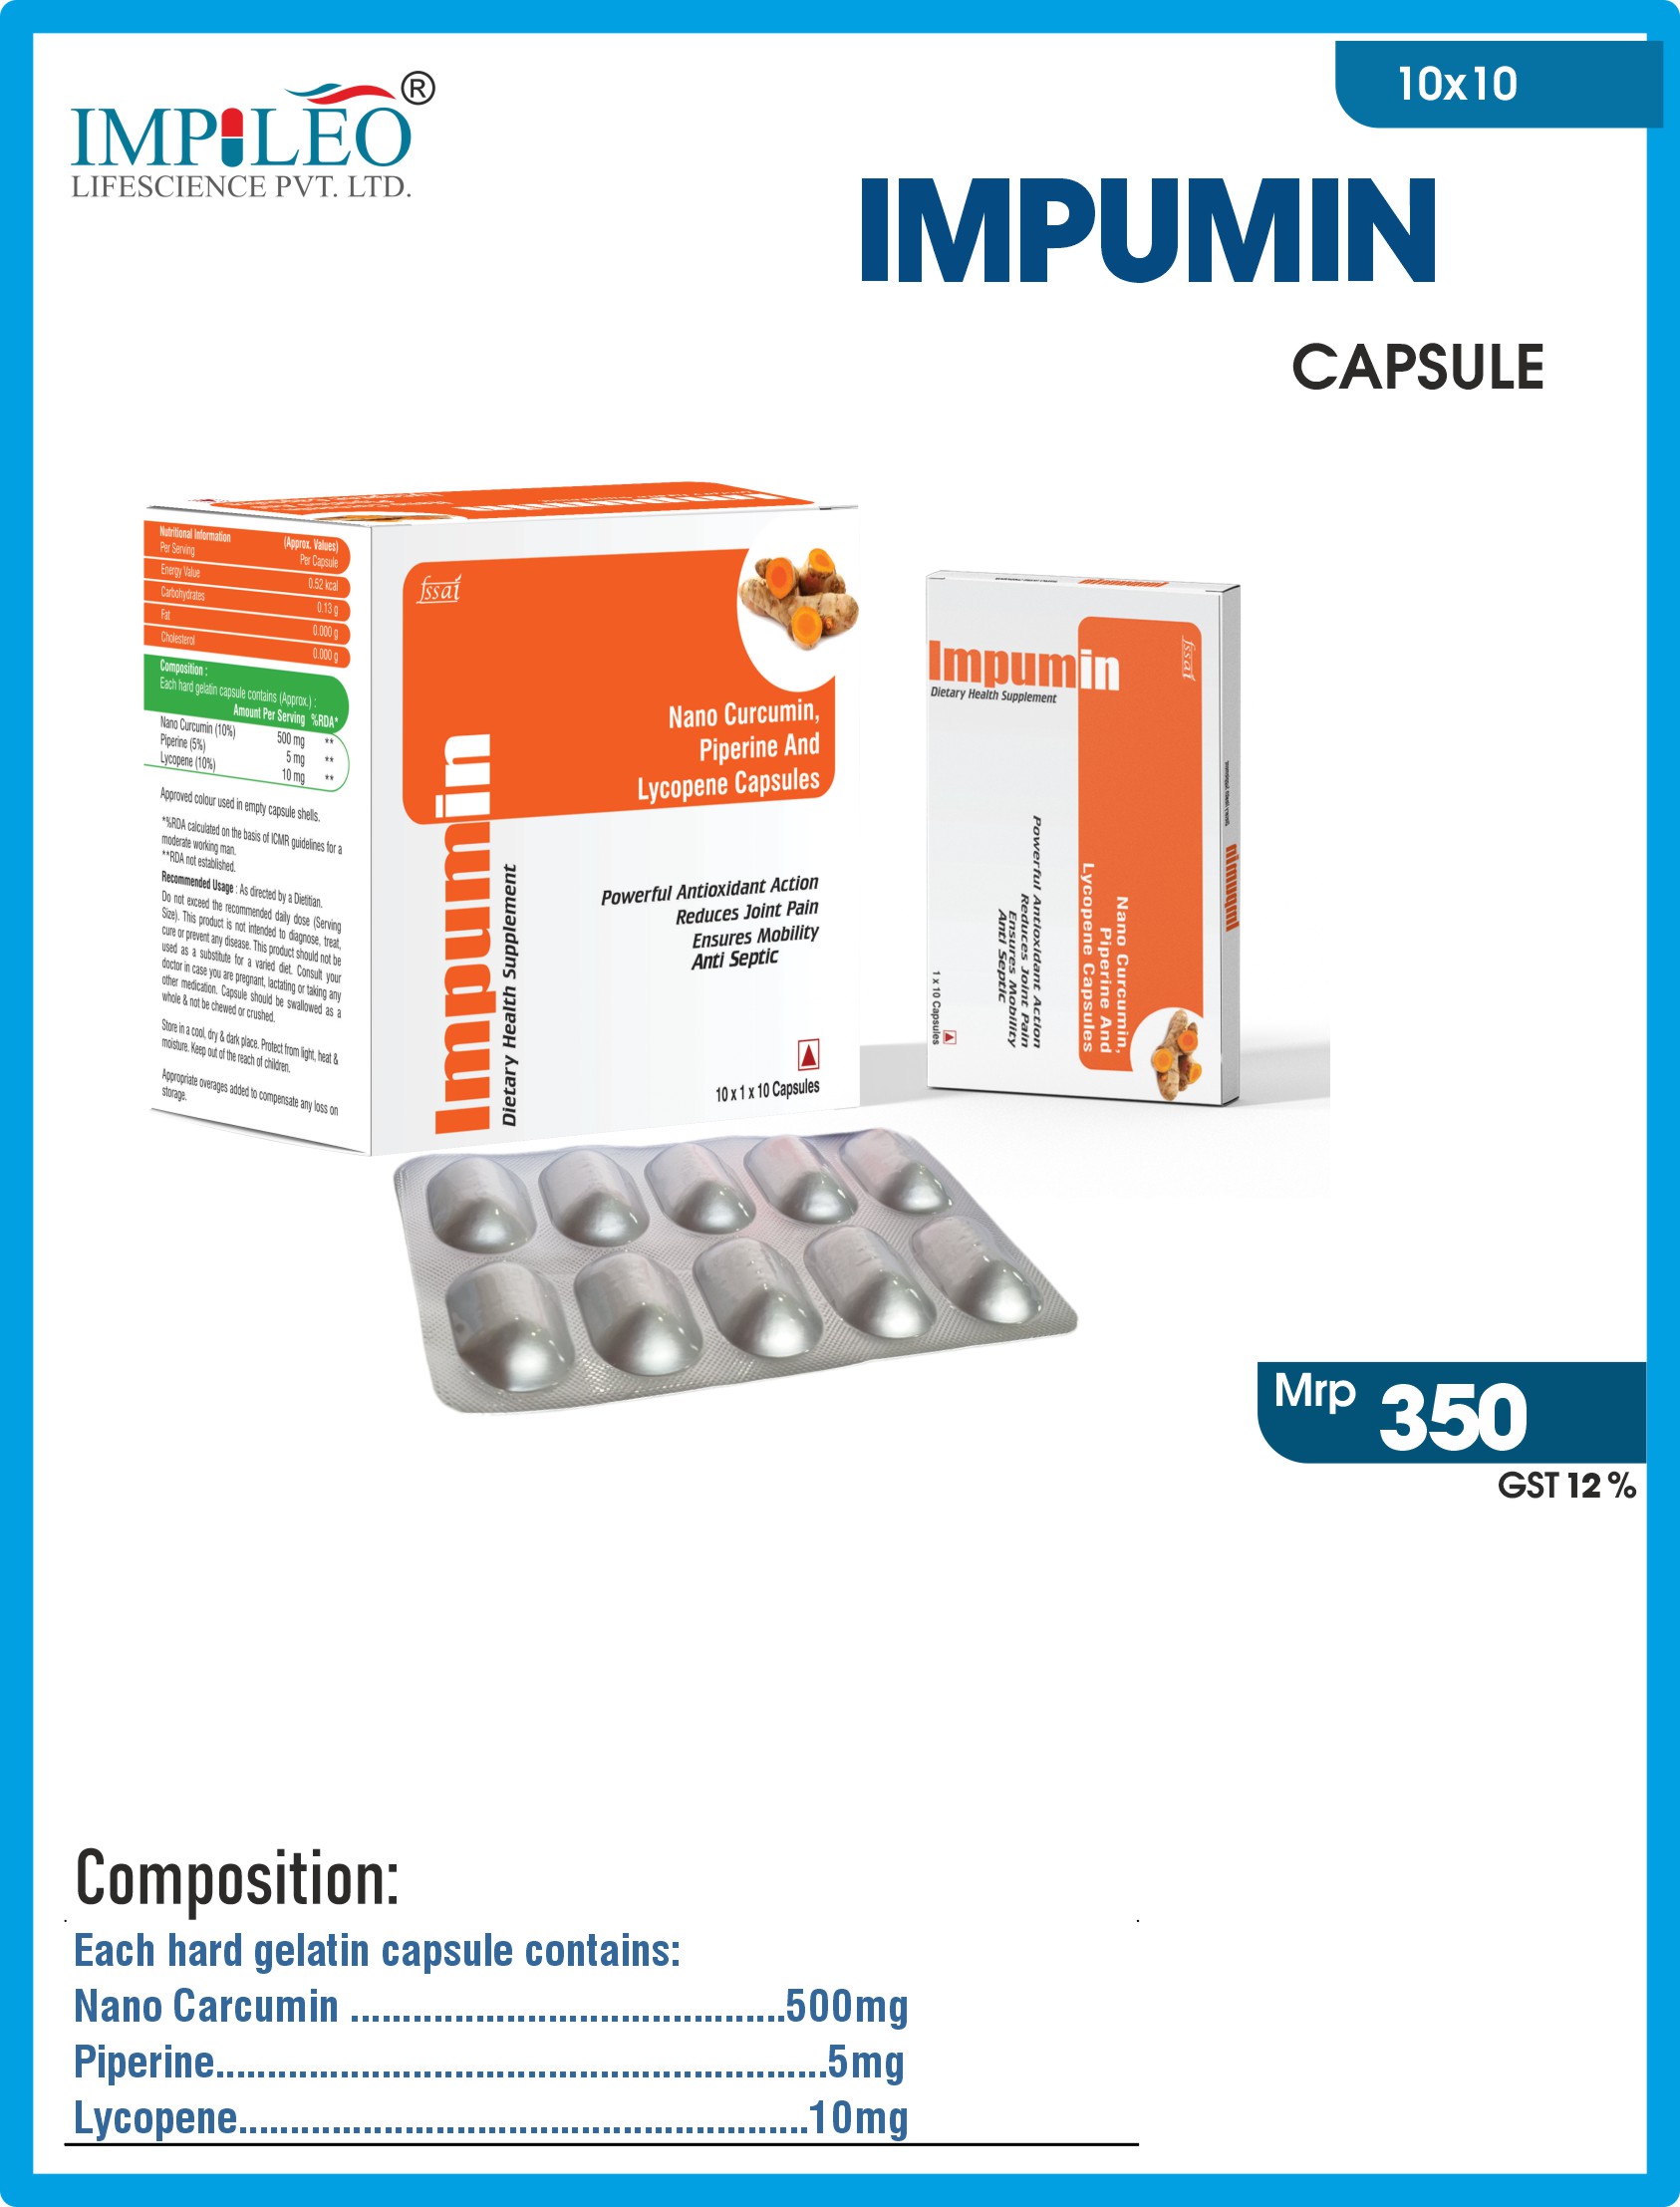 Partner with Us: PCD Pharma Franchise in Panchkula for IMPUMIN Capsule